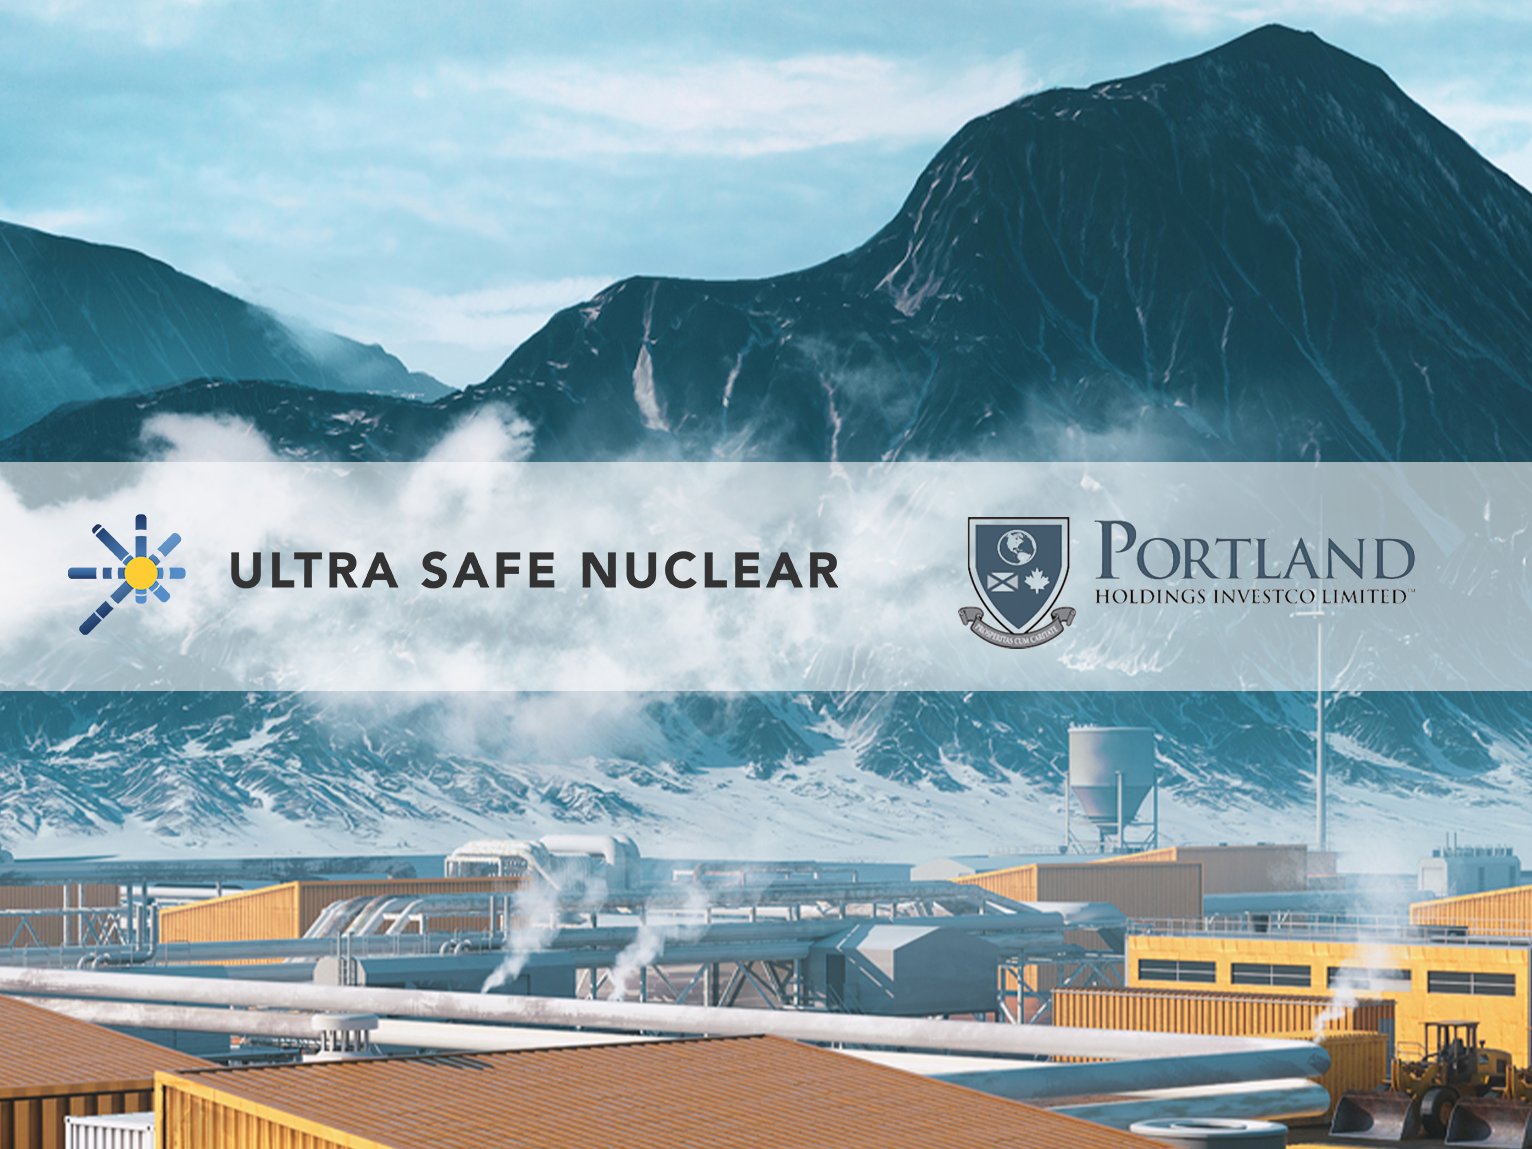 Ultra Safe Nuclear Corporation and Portland Holdings Sign an MOU to Provide Support for Countries and Industries in the Advancement of their Zero-Carbon Goals